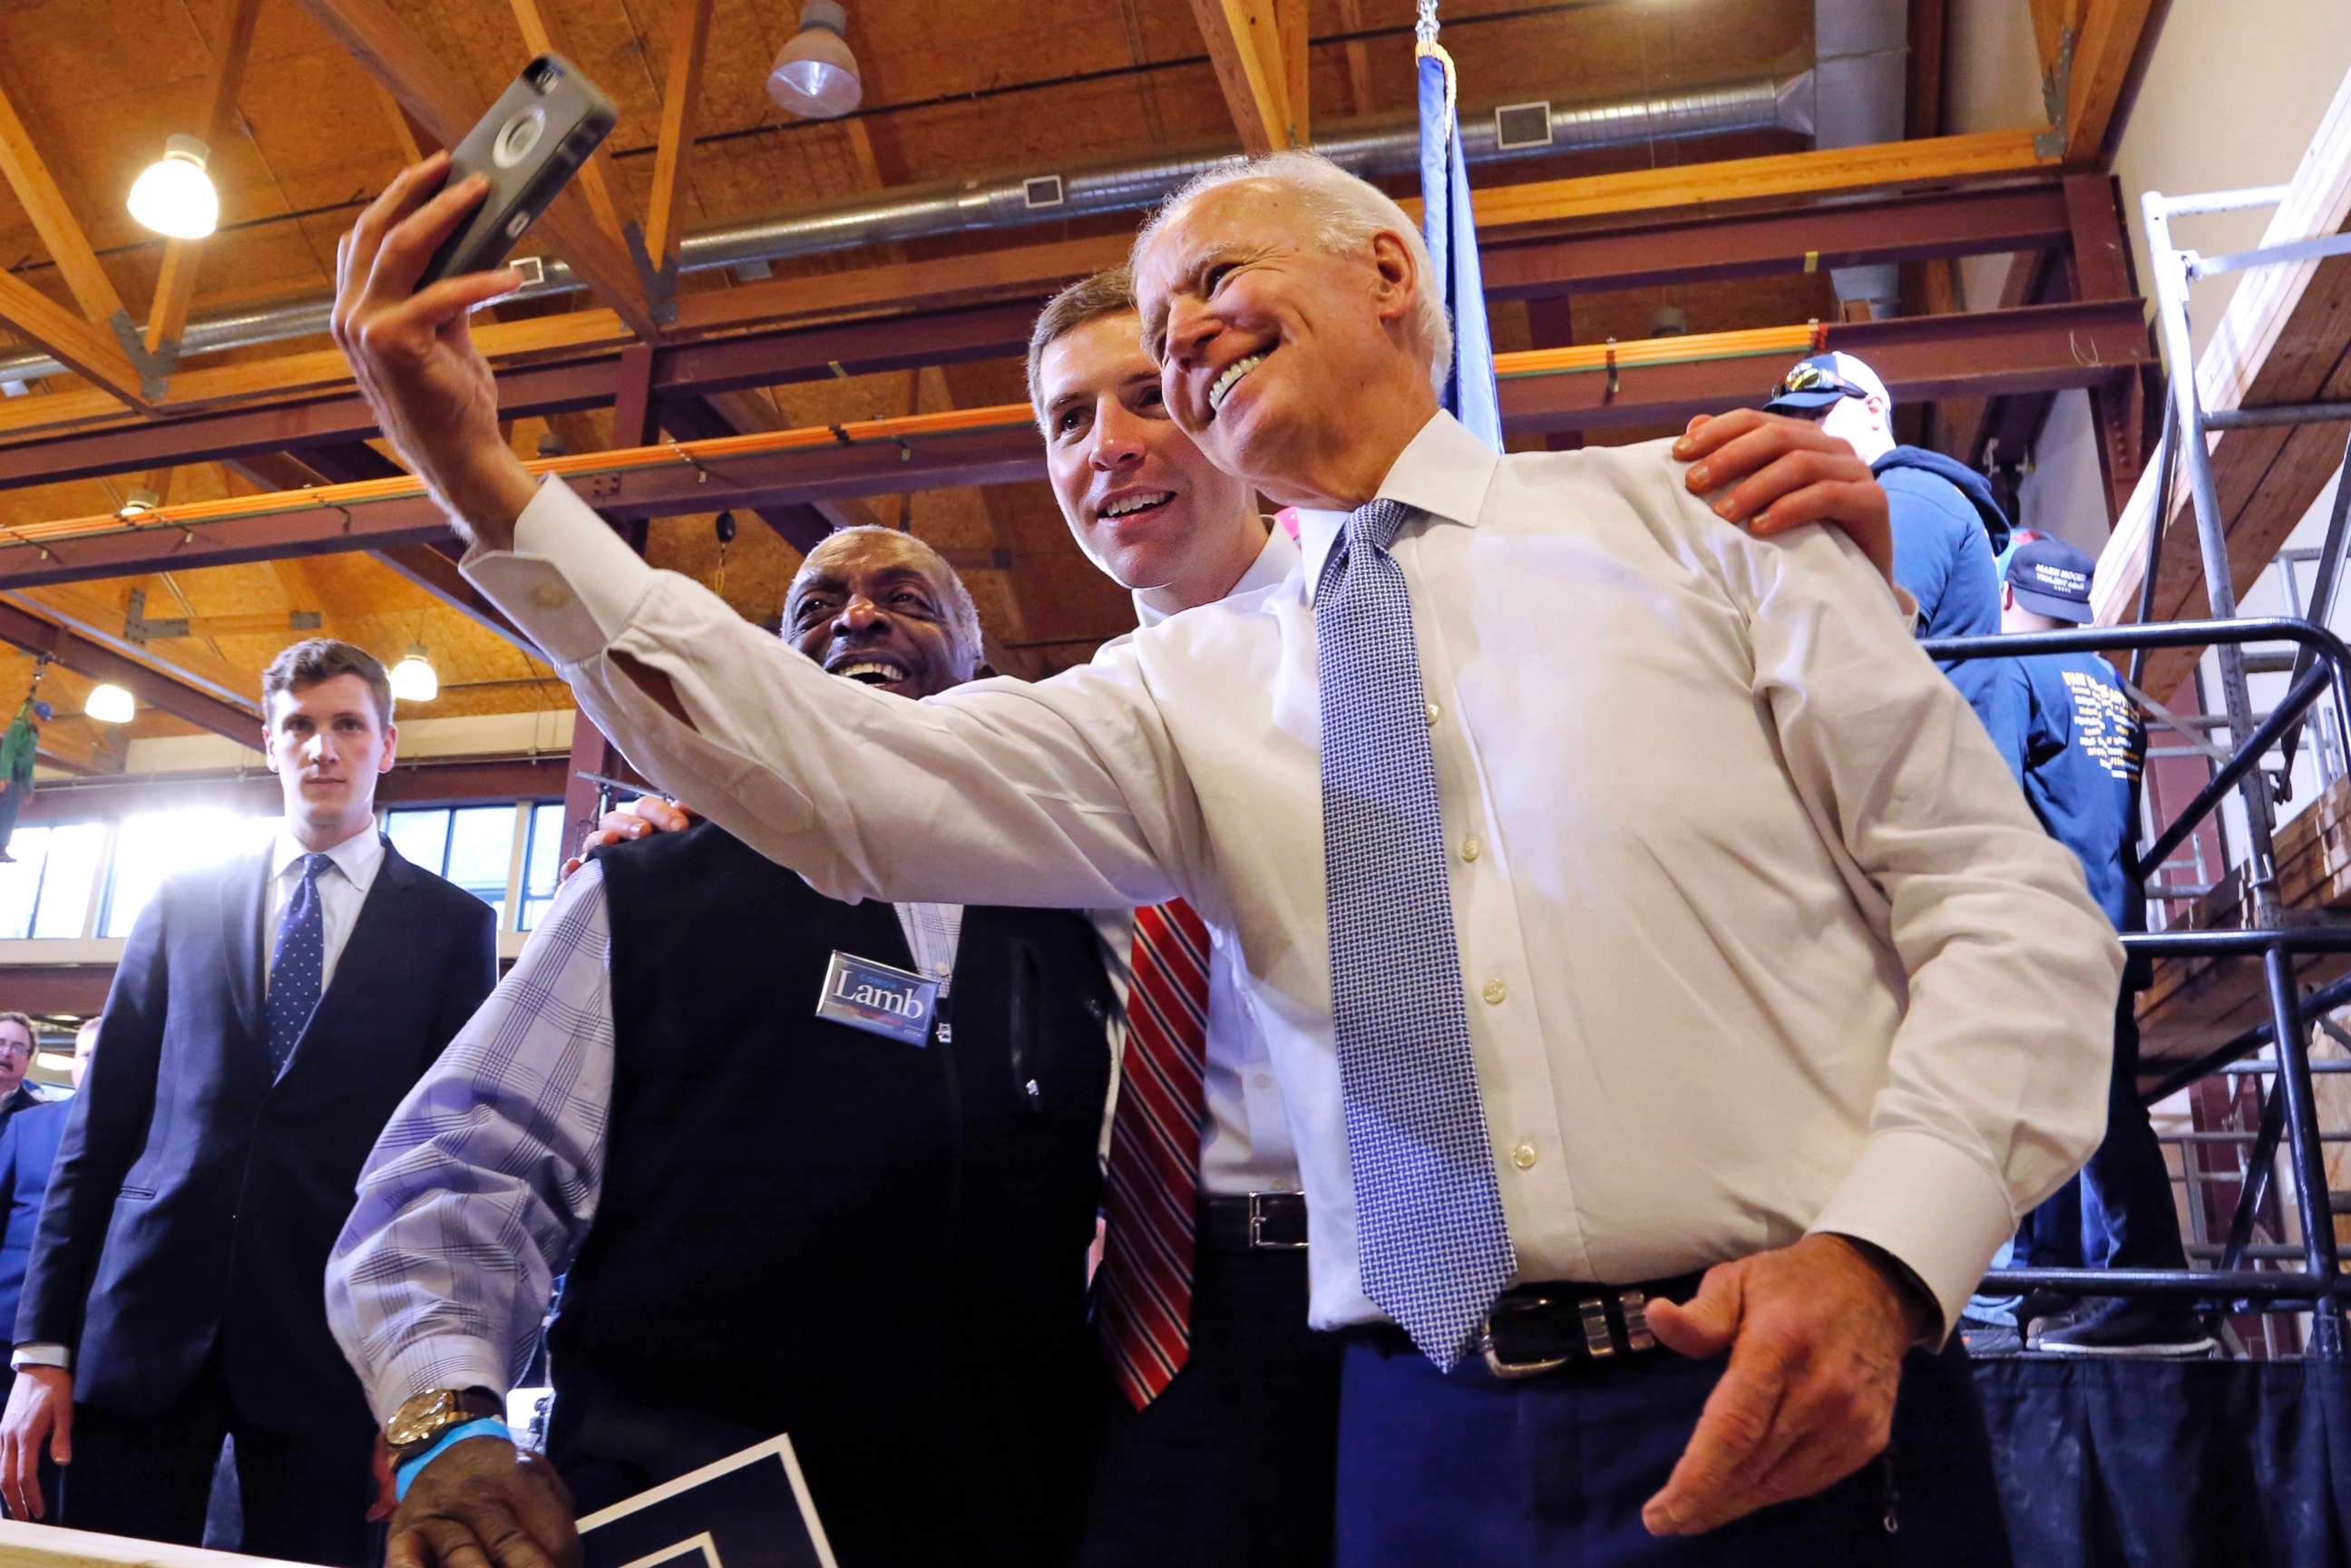 PHOTO: Conor Lamb, center, the Democratic candidate for the March 13 special election in Pennsylvania's 18th Congressional District, and former Vice President Joe Biden pose for a selfie with a supporter during a rally in Collier, Pa., March 6, 2018.